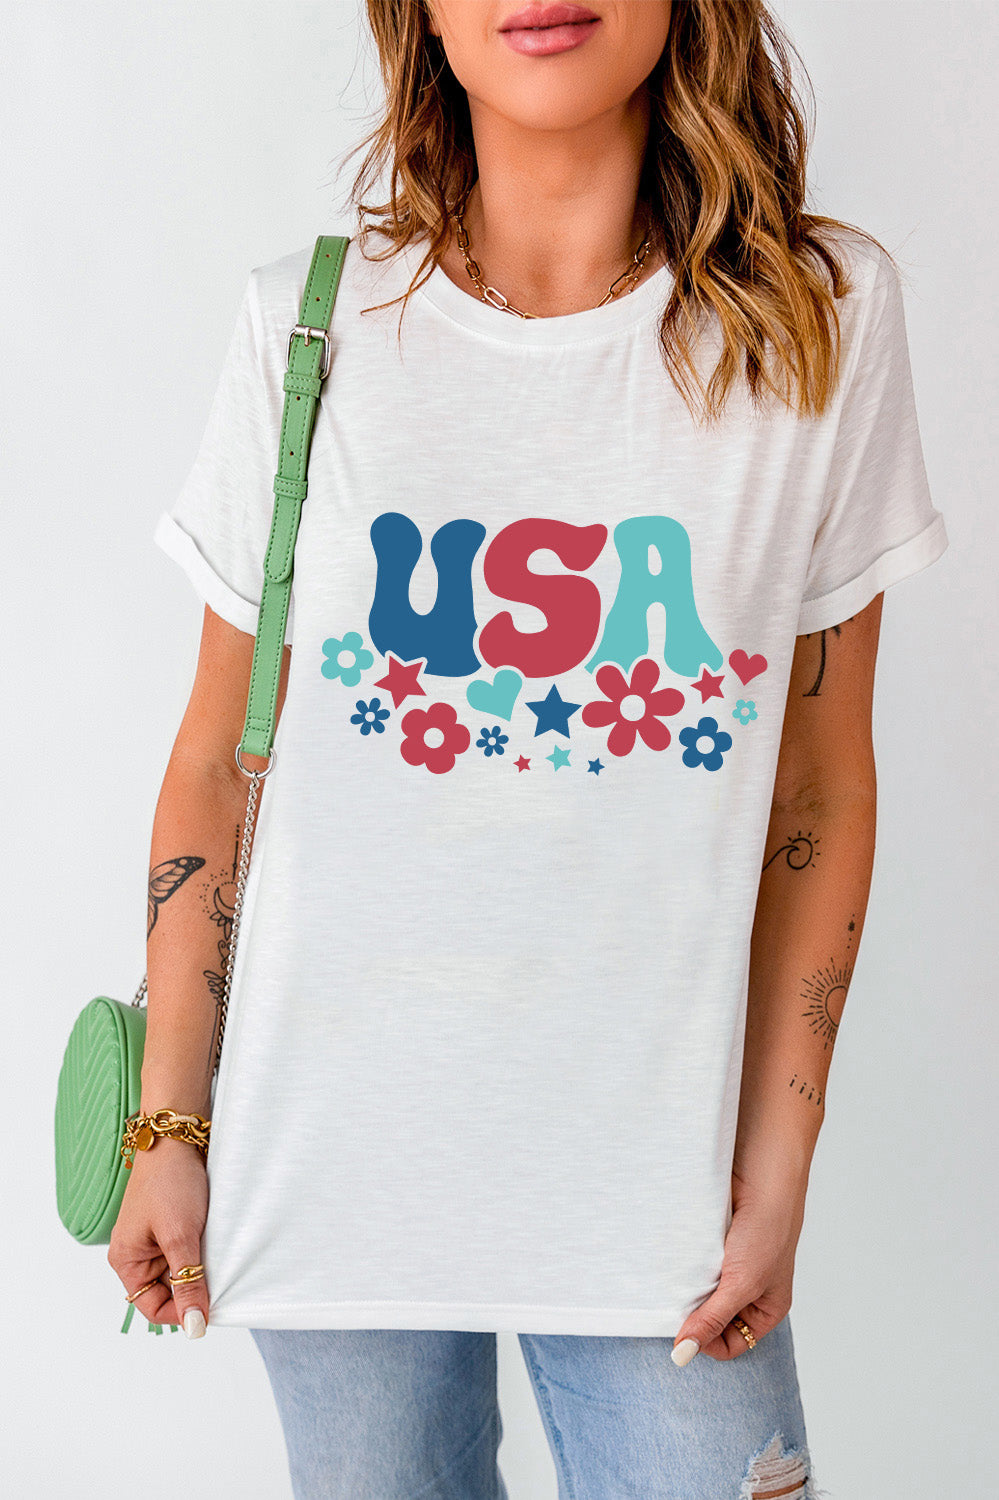 USA Round Neck Short Sleeve T-Shirt Casual Chic Boutique